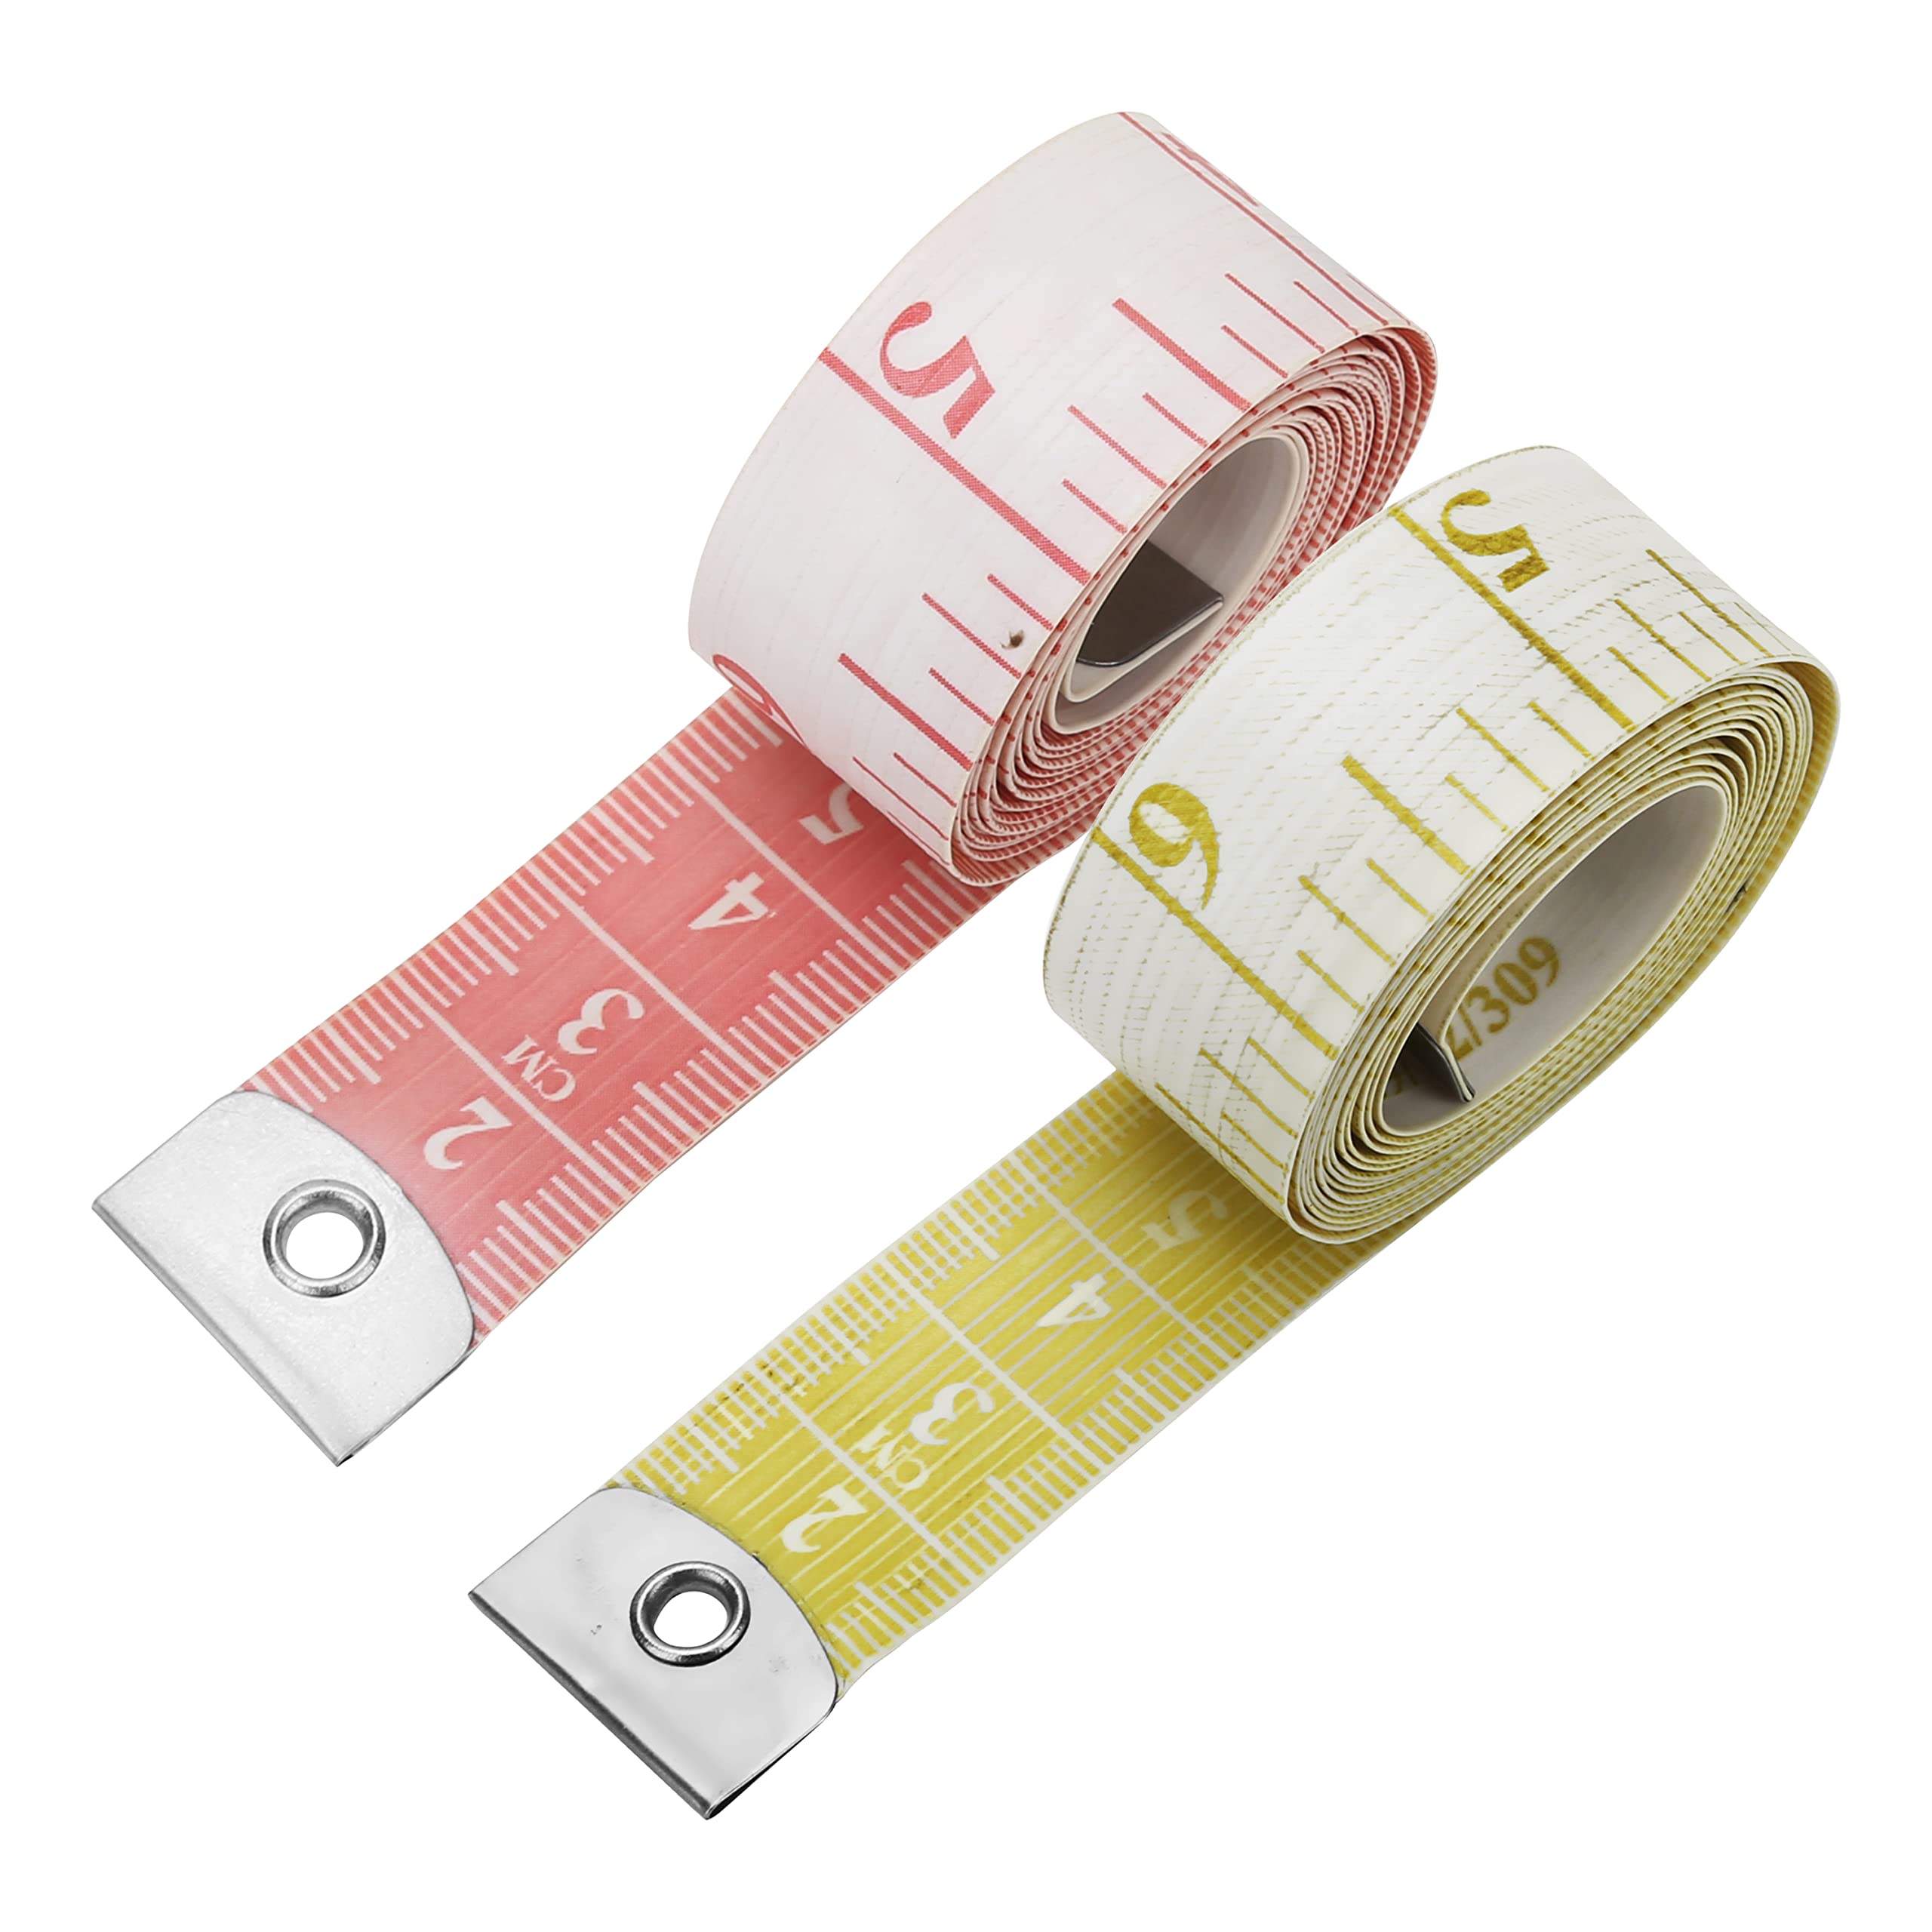  RAAJSEE Flexible Tape Measure Pack of 2, Accurate Measuring  Tape for Body, Weight Loss & Medical Measurements, Dual Scale Cloth Sewing  Tailor Ruler